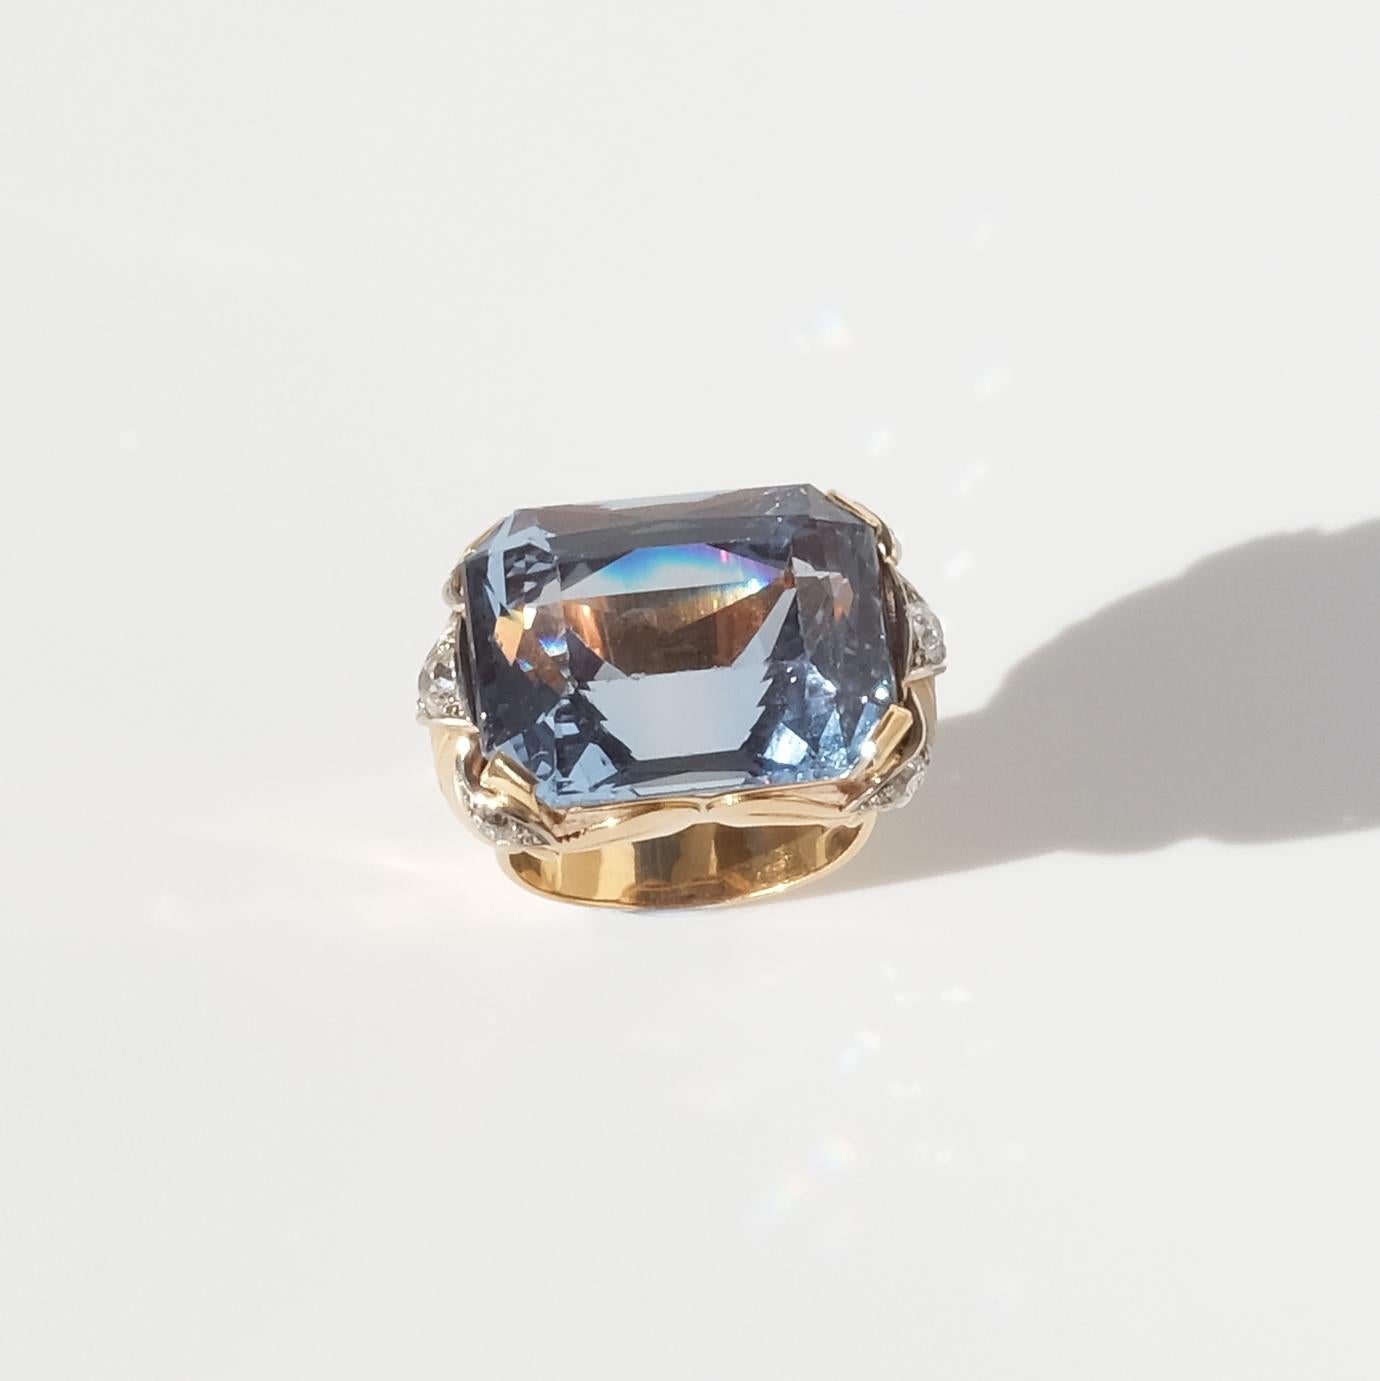 This 18 karat gold ring has a large clear-blue rectangular mixed-cut synhtetic spinel. The setting is adorned with six old-cut diamonds and beautiful gold decorations.

The unconventional very large size of this ring radiates powerfulness and